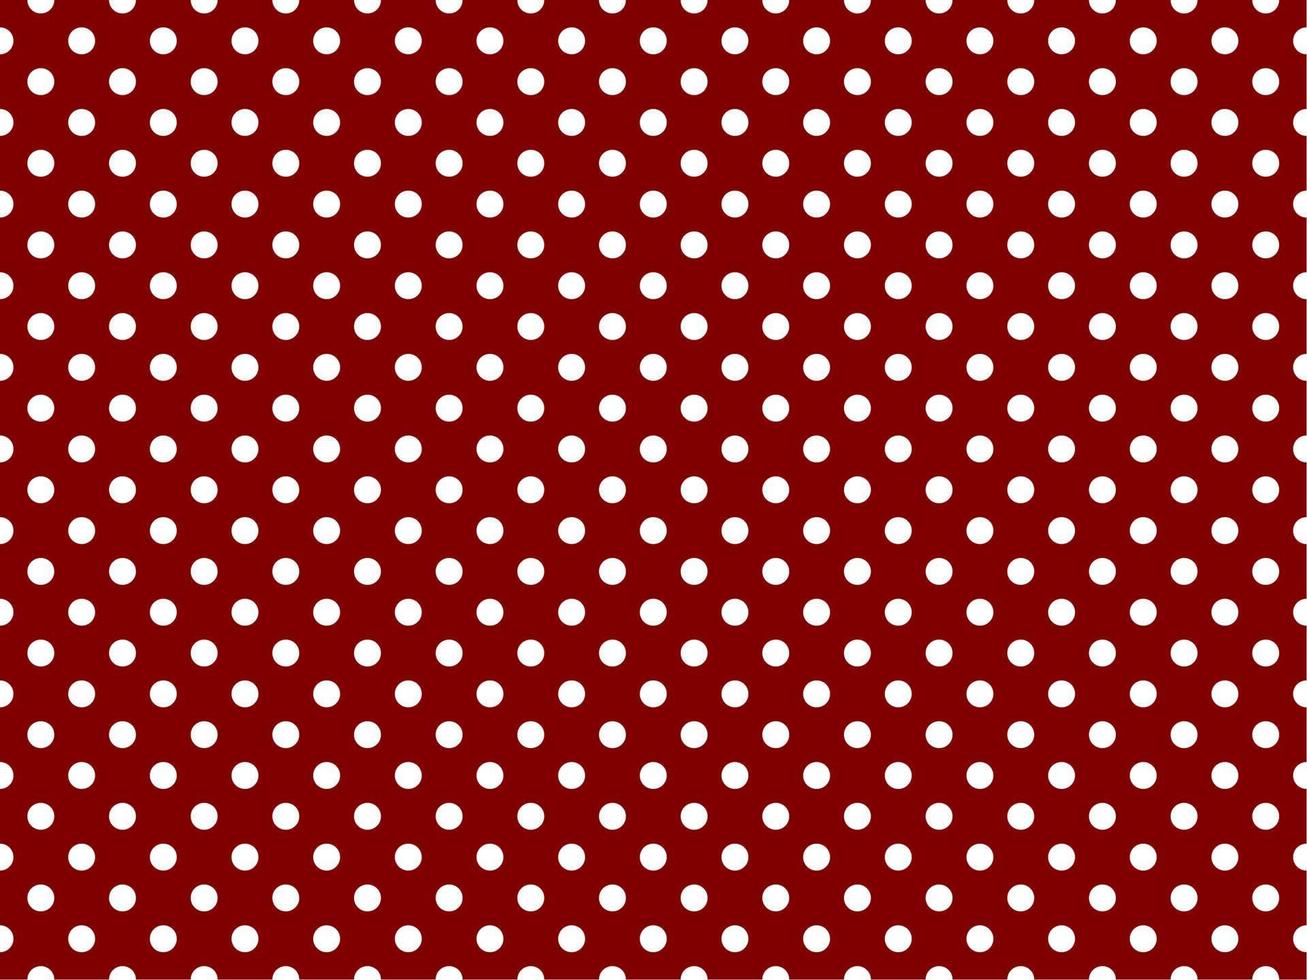 white polka dots over maroon background vector